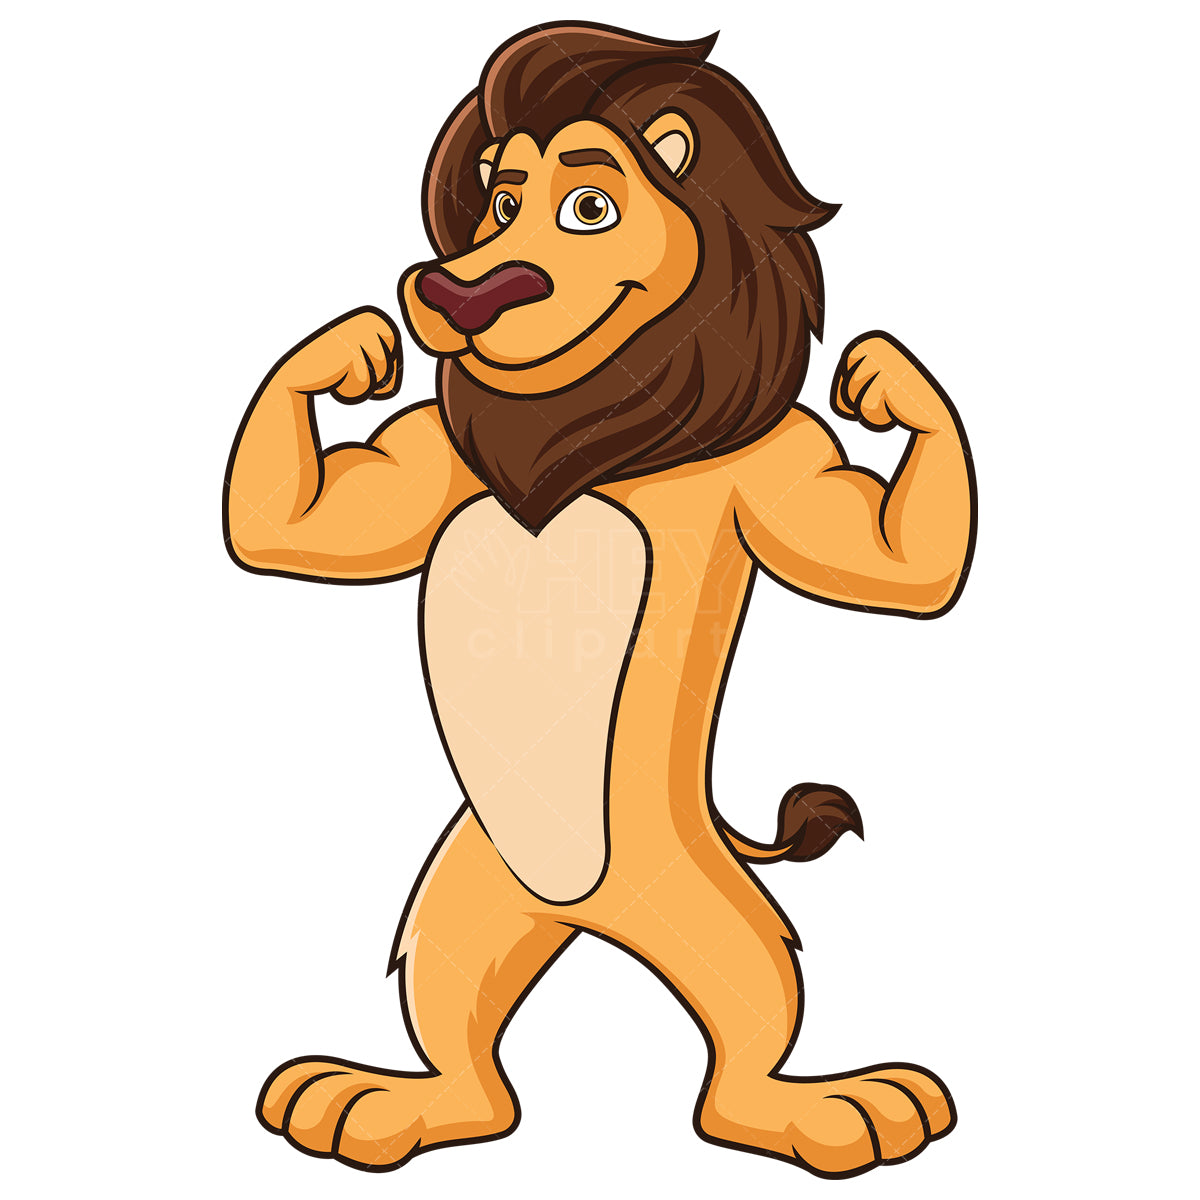 Royalty-free stock vector illustration of a lion flexing muscles.